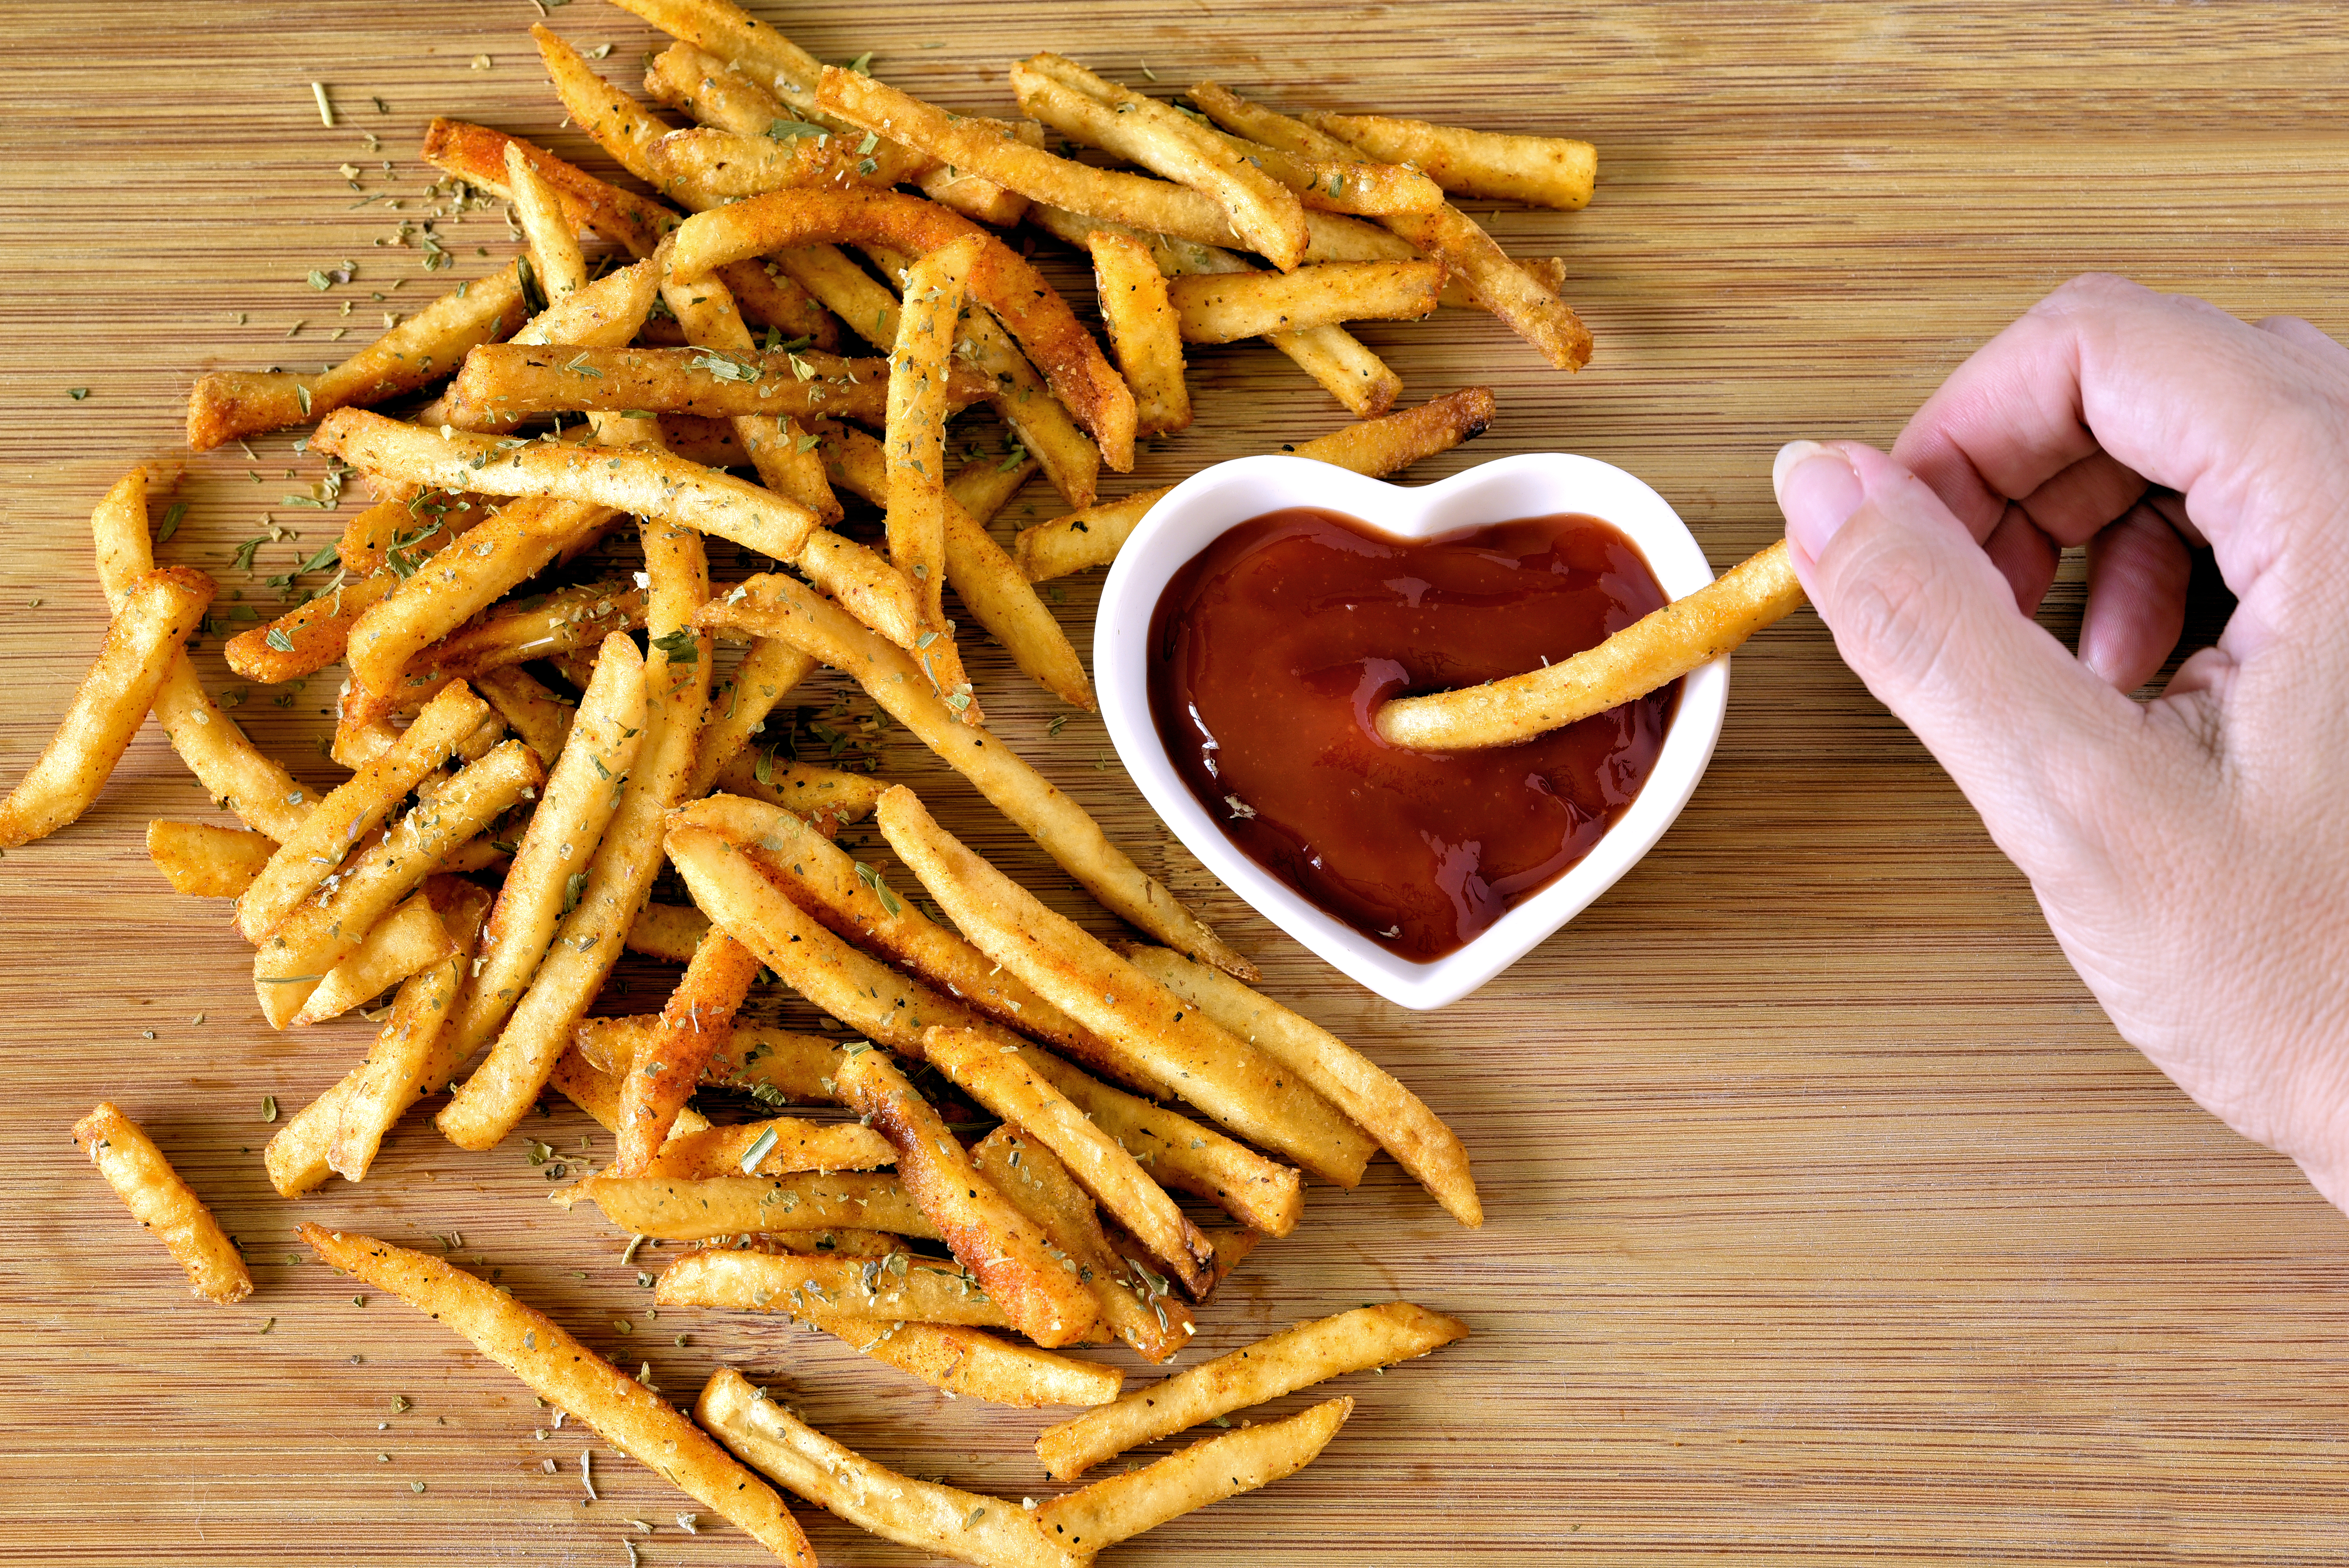 Here's where to get free fries on National French Fry Day